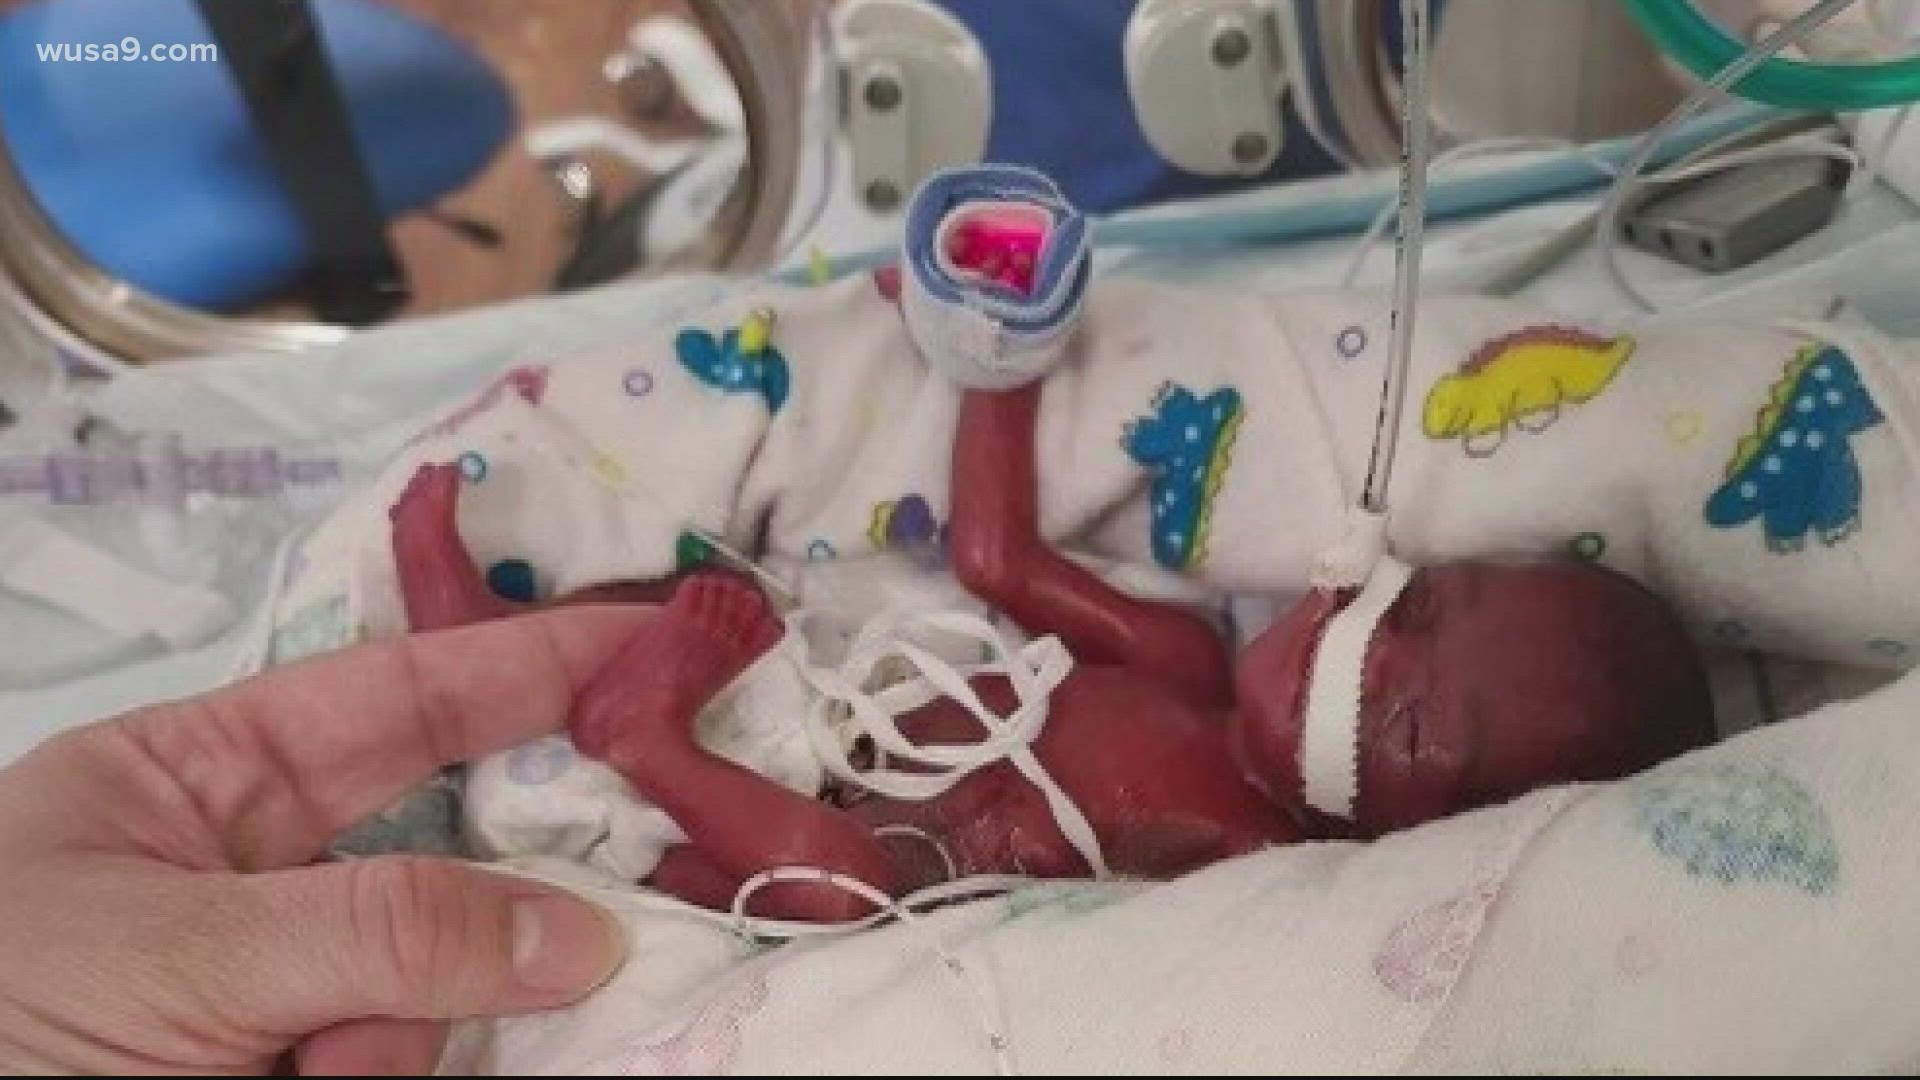 As premature baby treatment improves, Holy Cross Health sees smallest baby on record weighing only 250 grams.